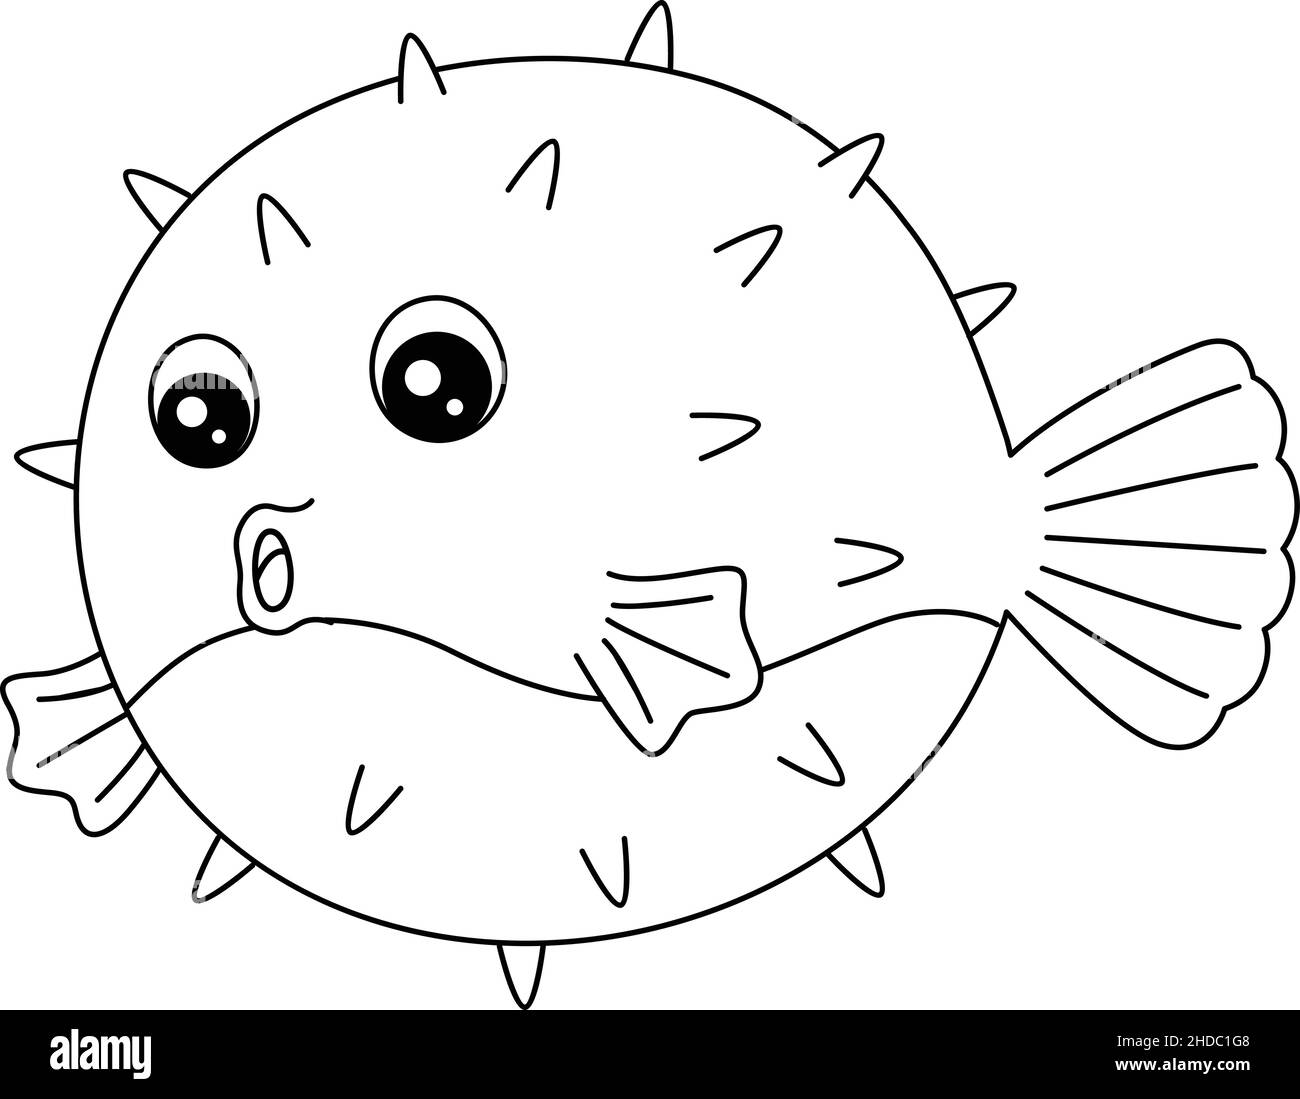 Pufferfish Coloring Page Isolated for Kids Stock Vector